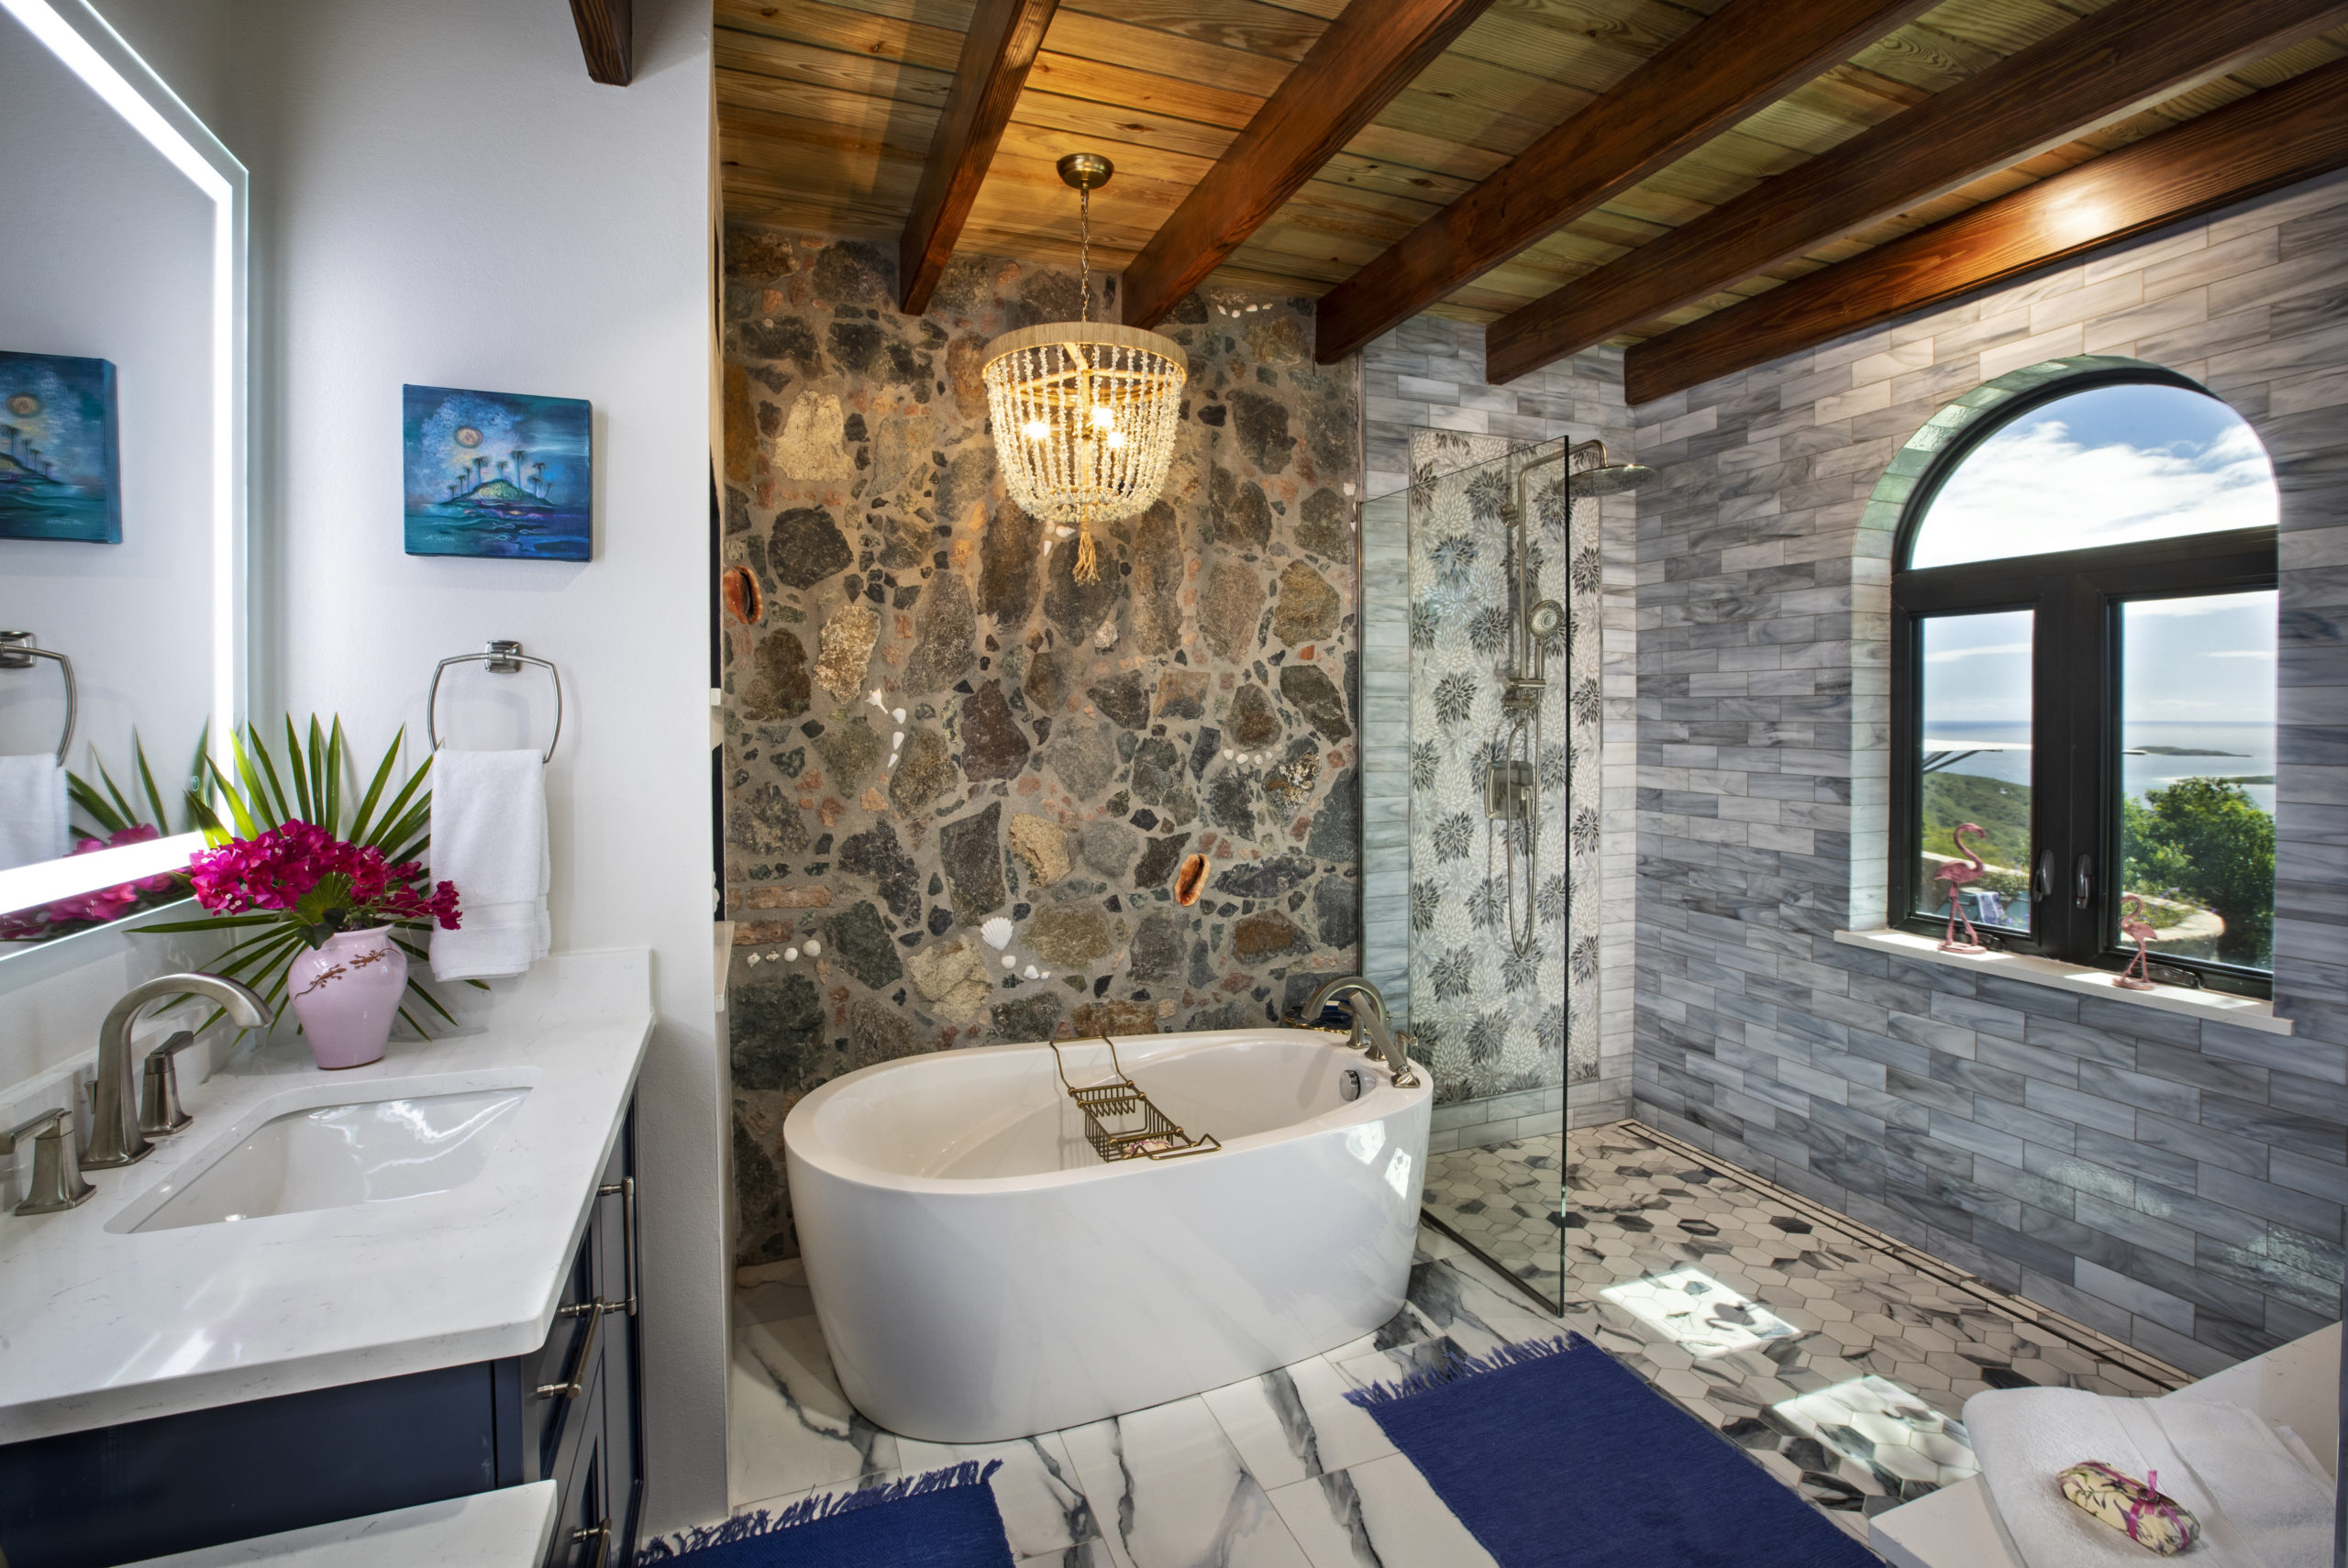 Master bath with stained glass and stone walls.